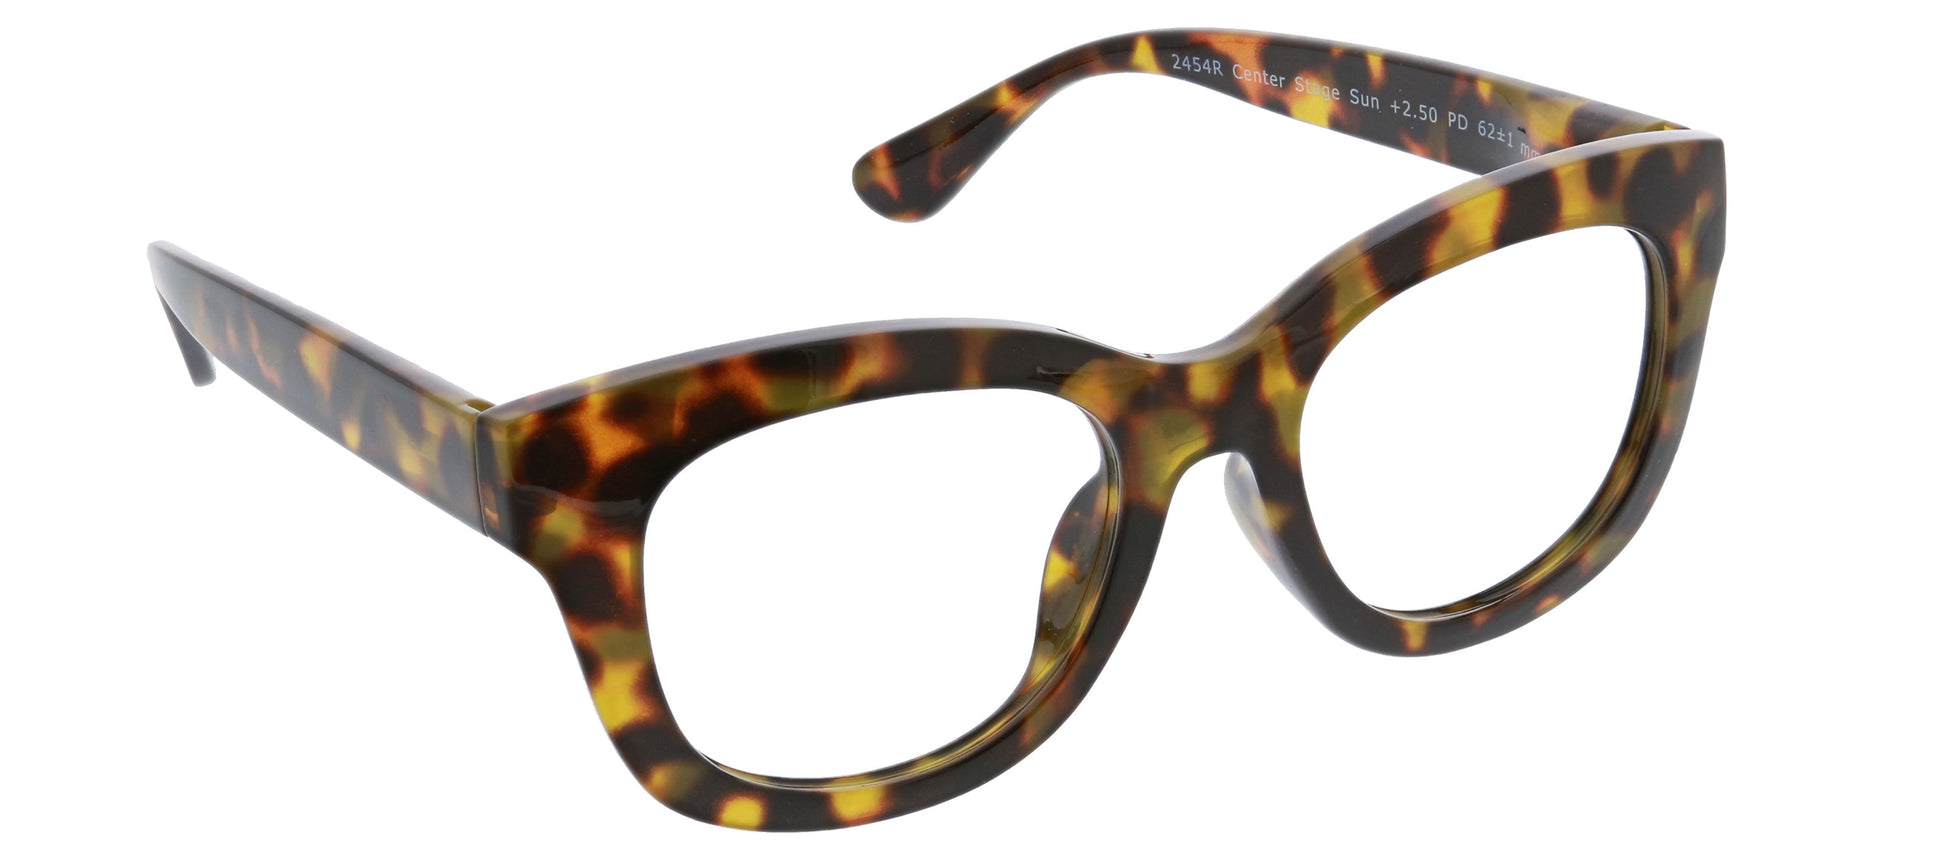 Peepers Reading Glasses - Center Stage - Tortoise glasses Peepers   